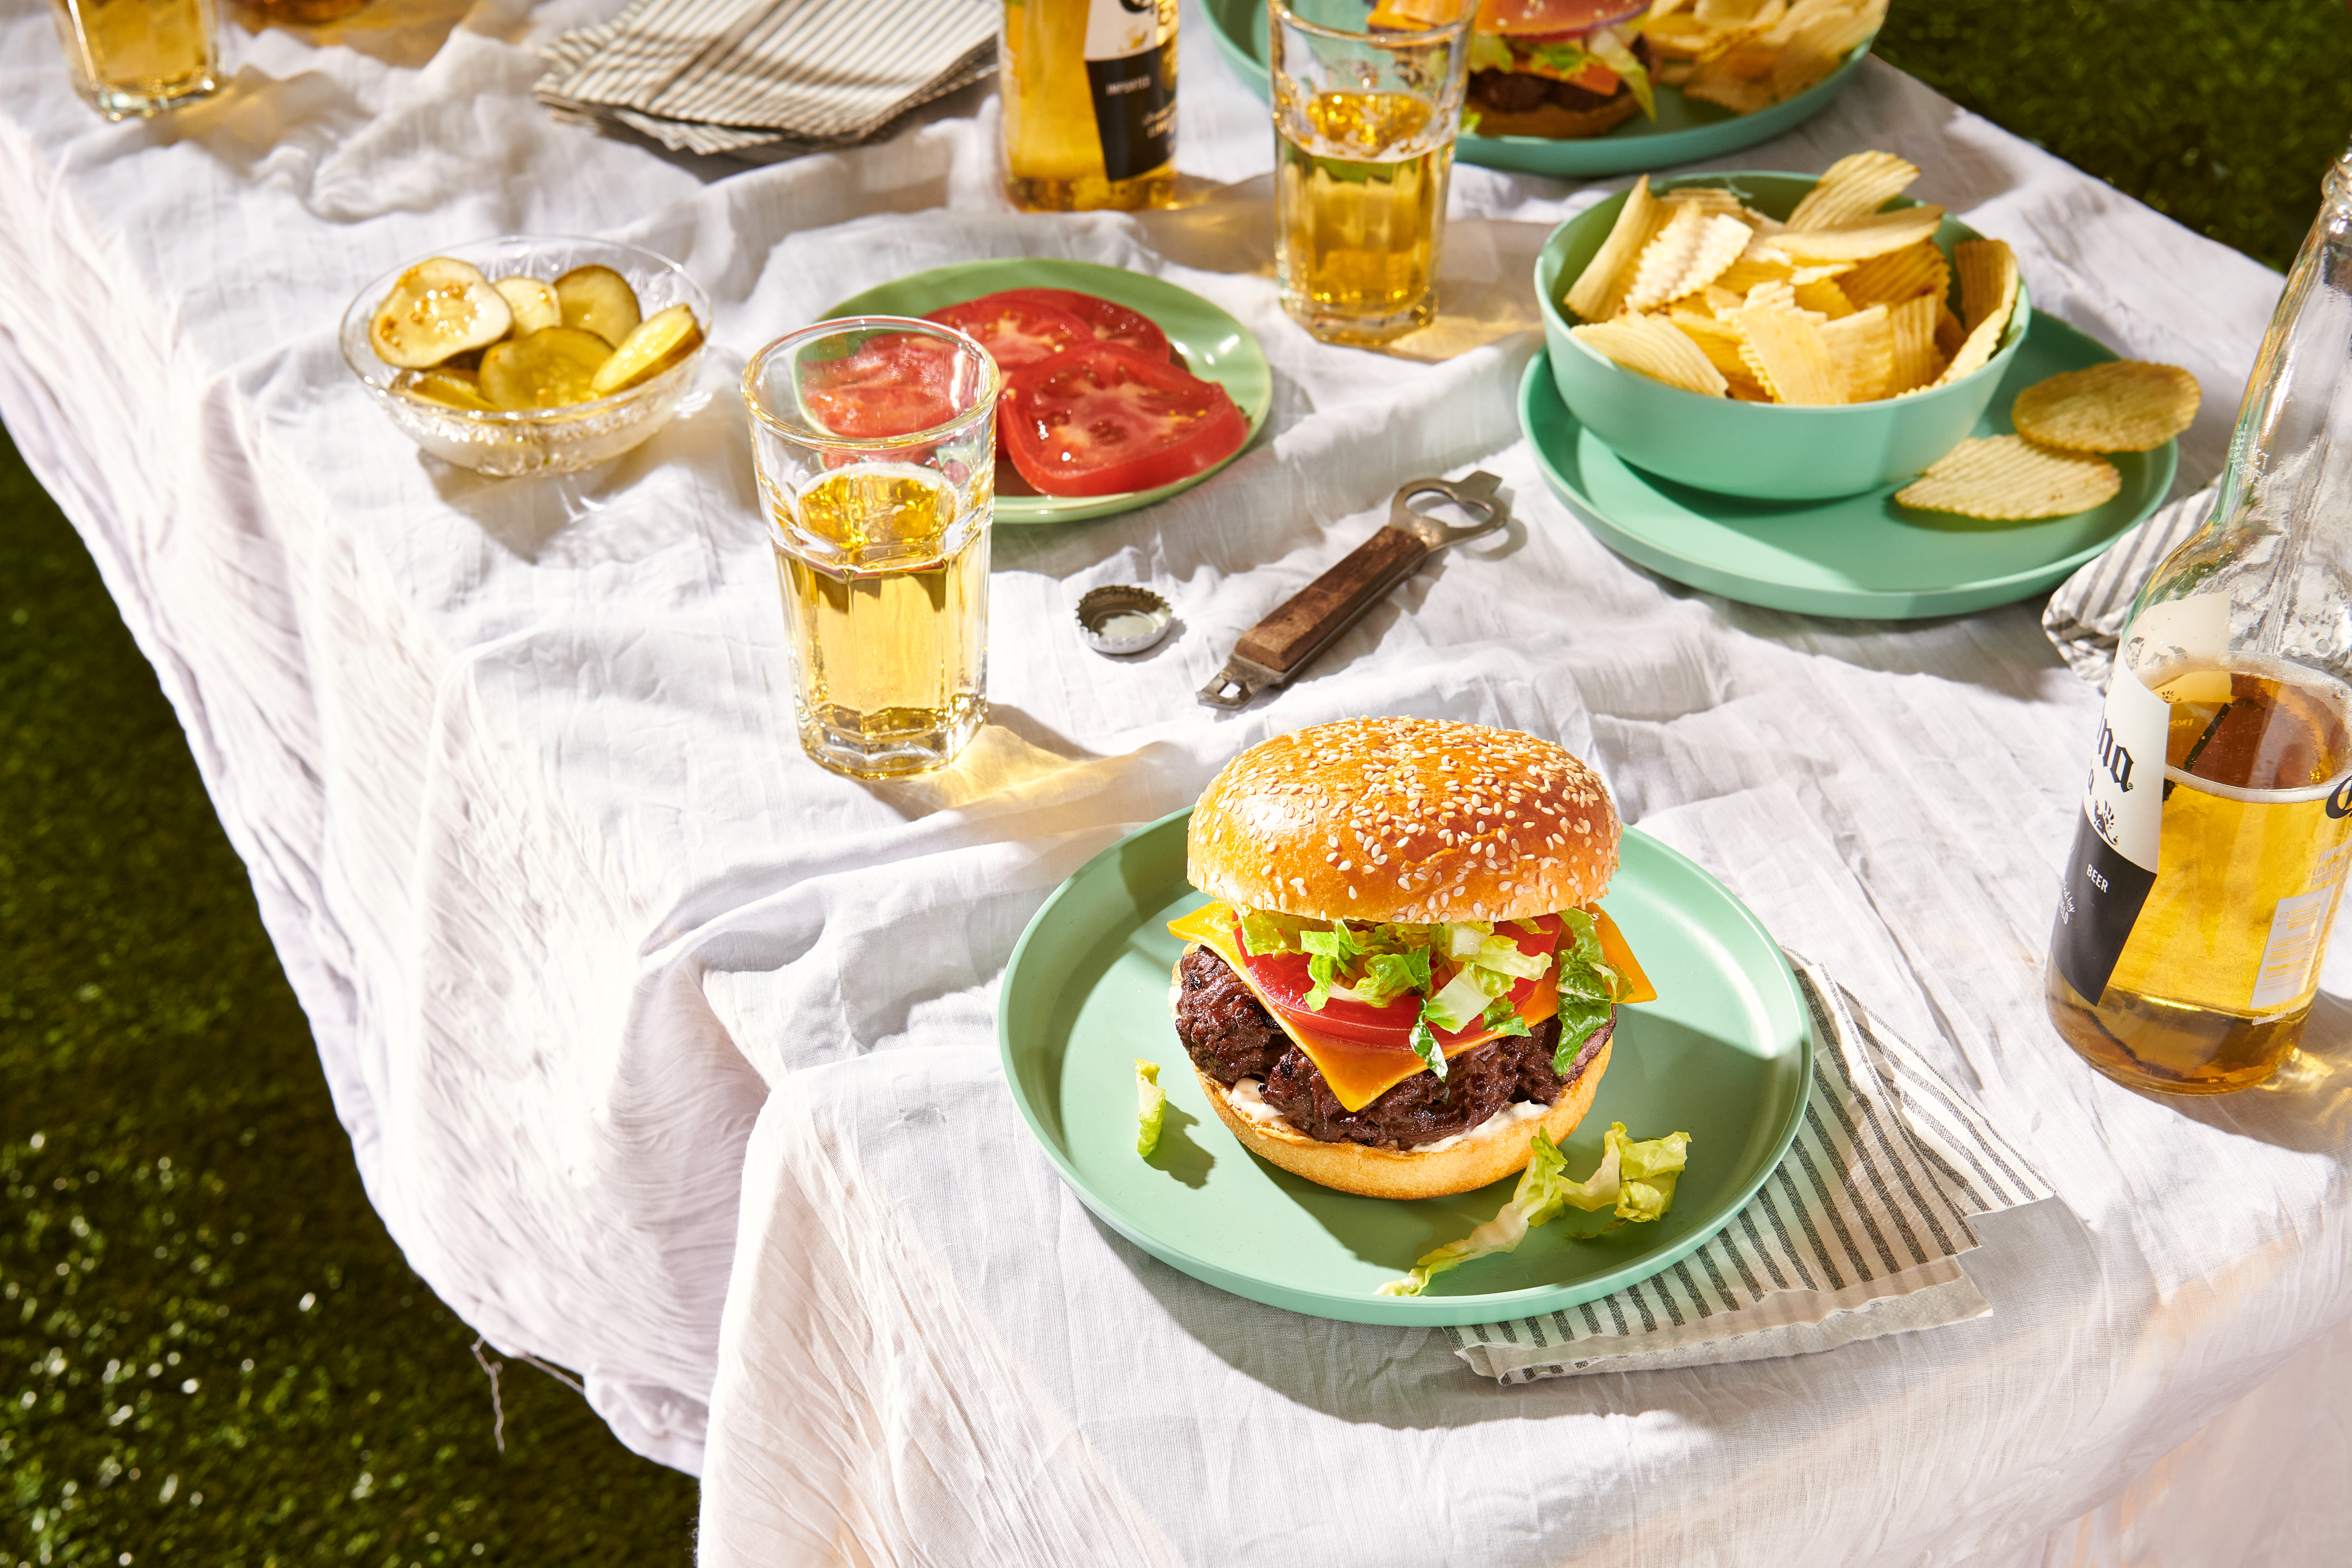 A burger topped with cheese, lettuce, and tomato sits on a table set with plates of tomato slices and chips and bottles of beer.